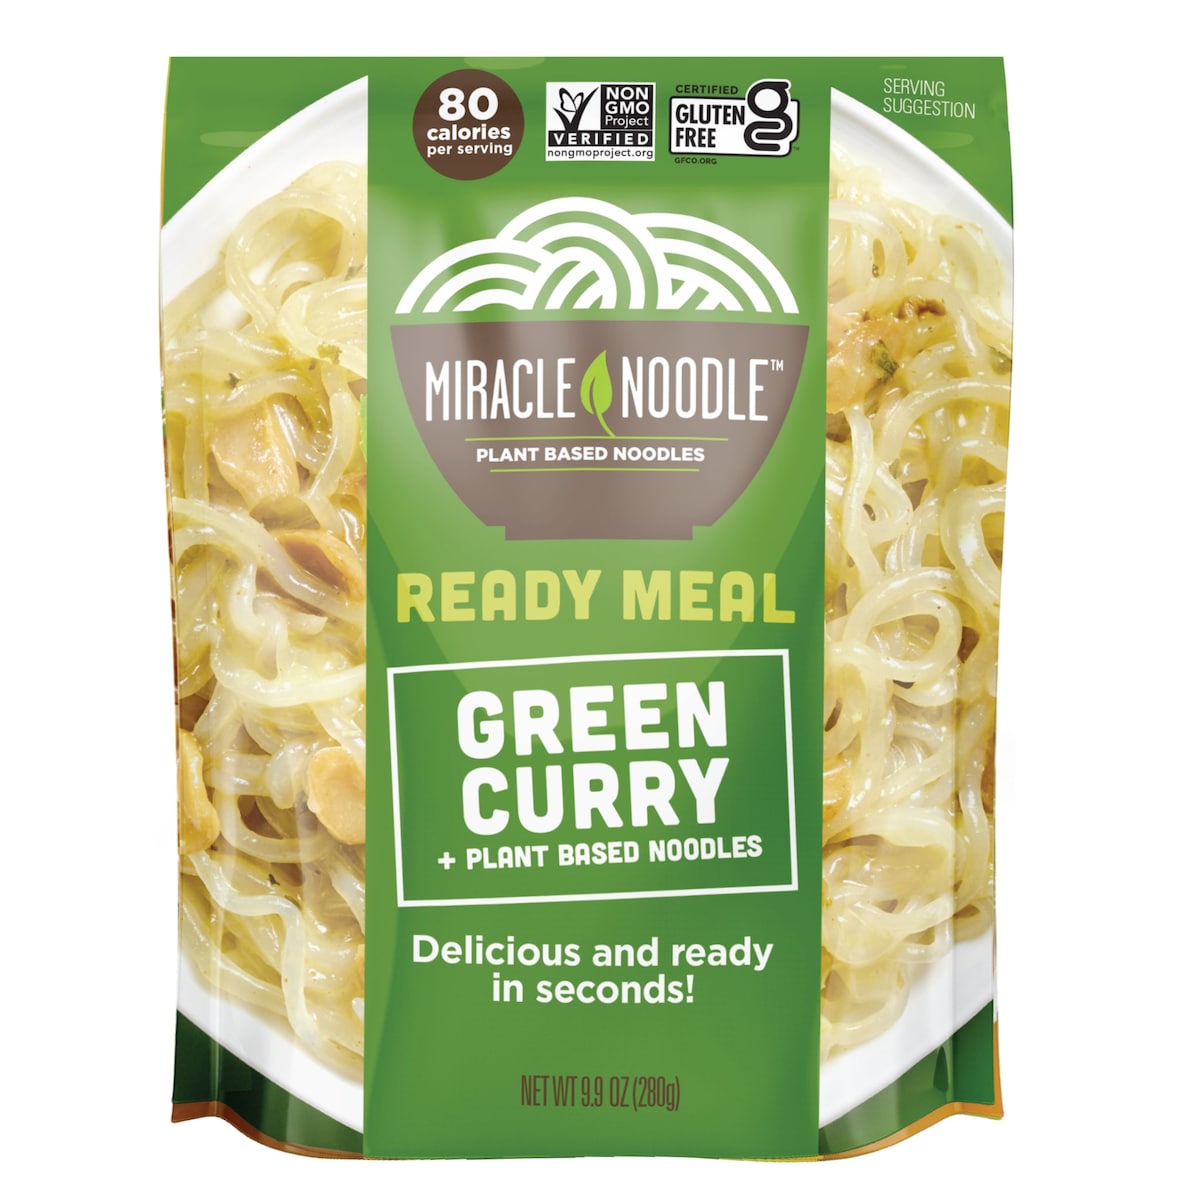 Miracle Noodle Green Curry 6 x 280g